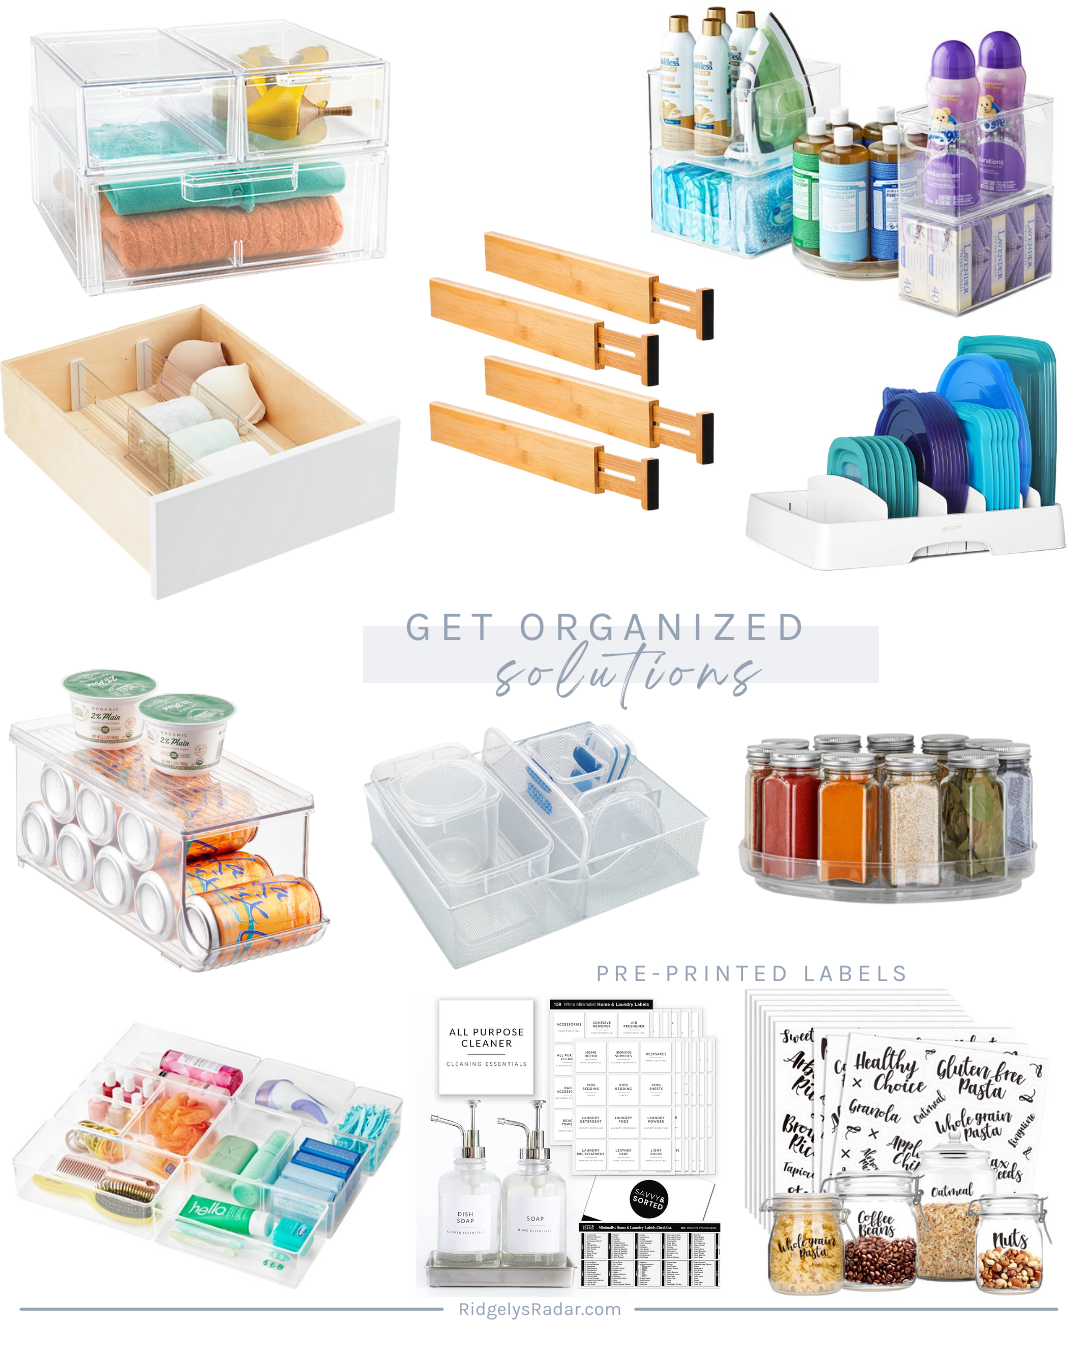 Here is a roundup of the best solutions to organize every cabinet in your house from your kitchen, laundry, bathroom and many more!